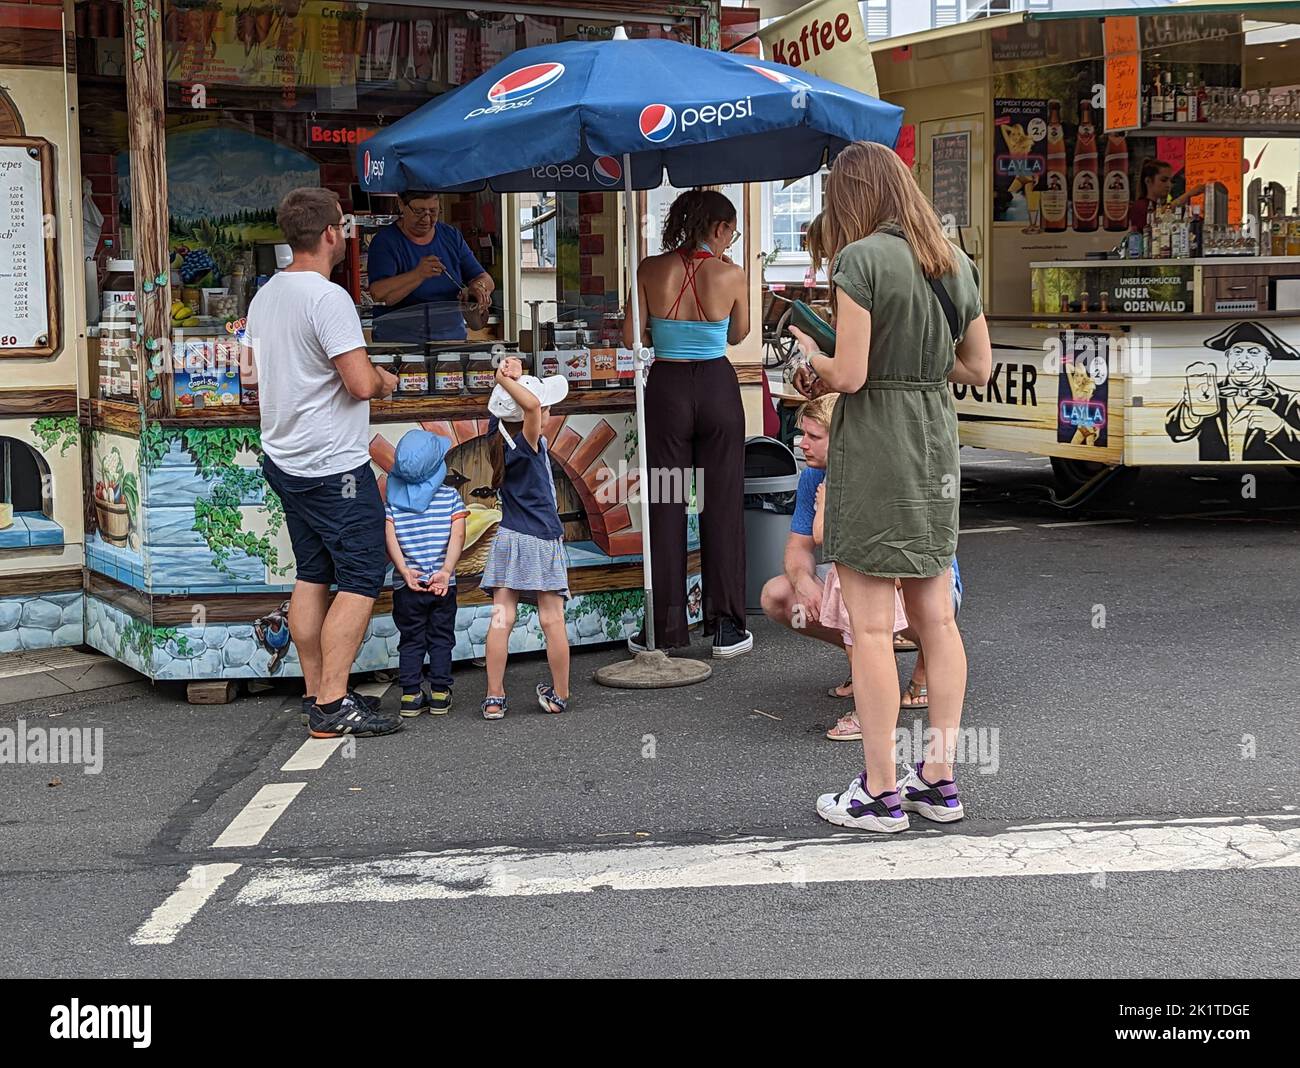 A group of people waiting in line at a crepes stand at a street fair Stock Photo